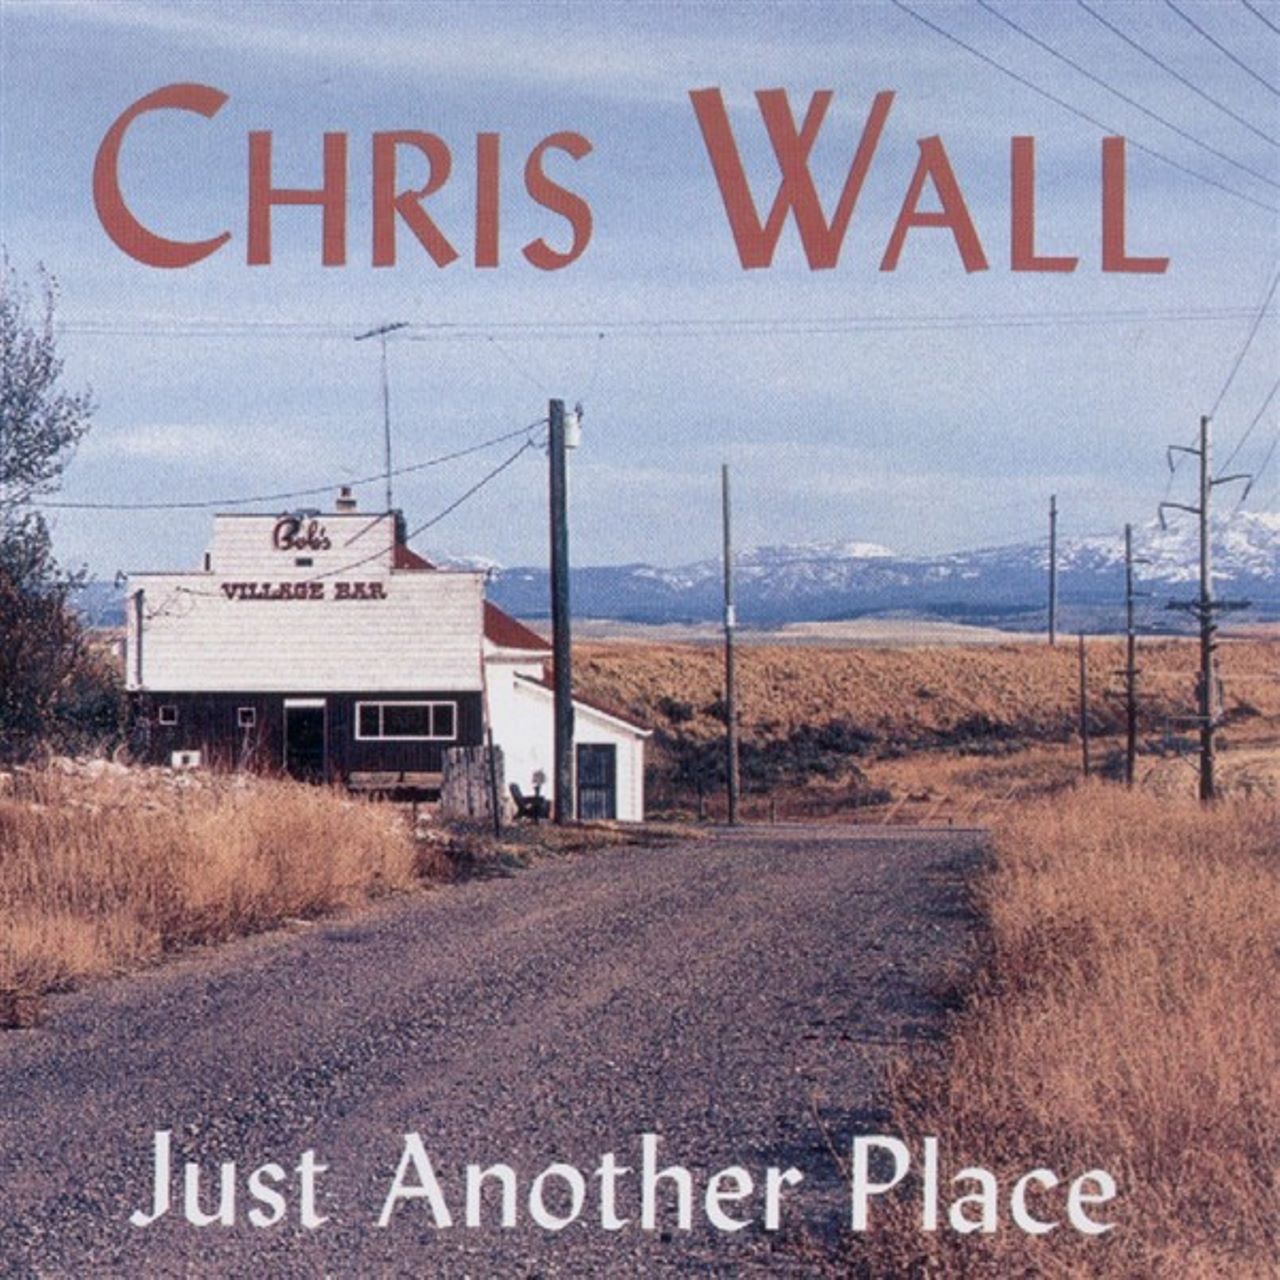 Chris Wall - Just Another Place cover album